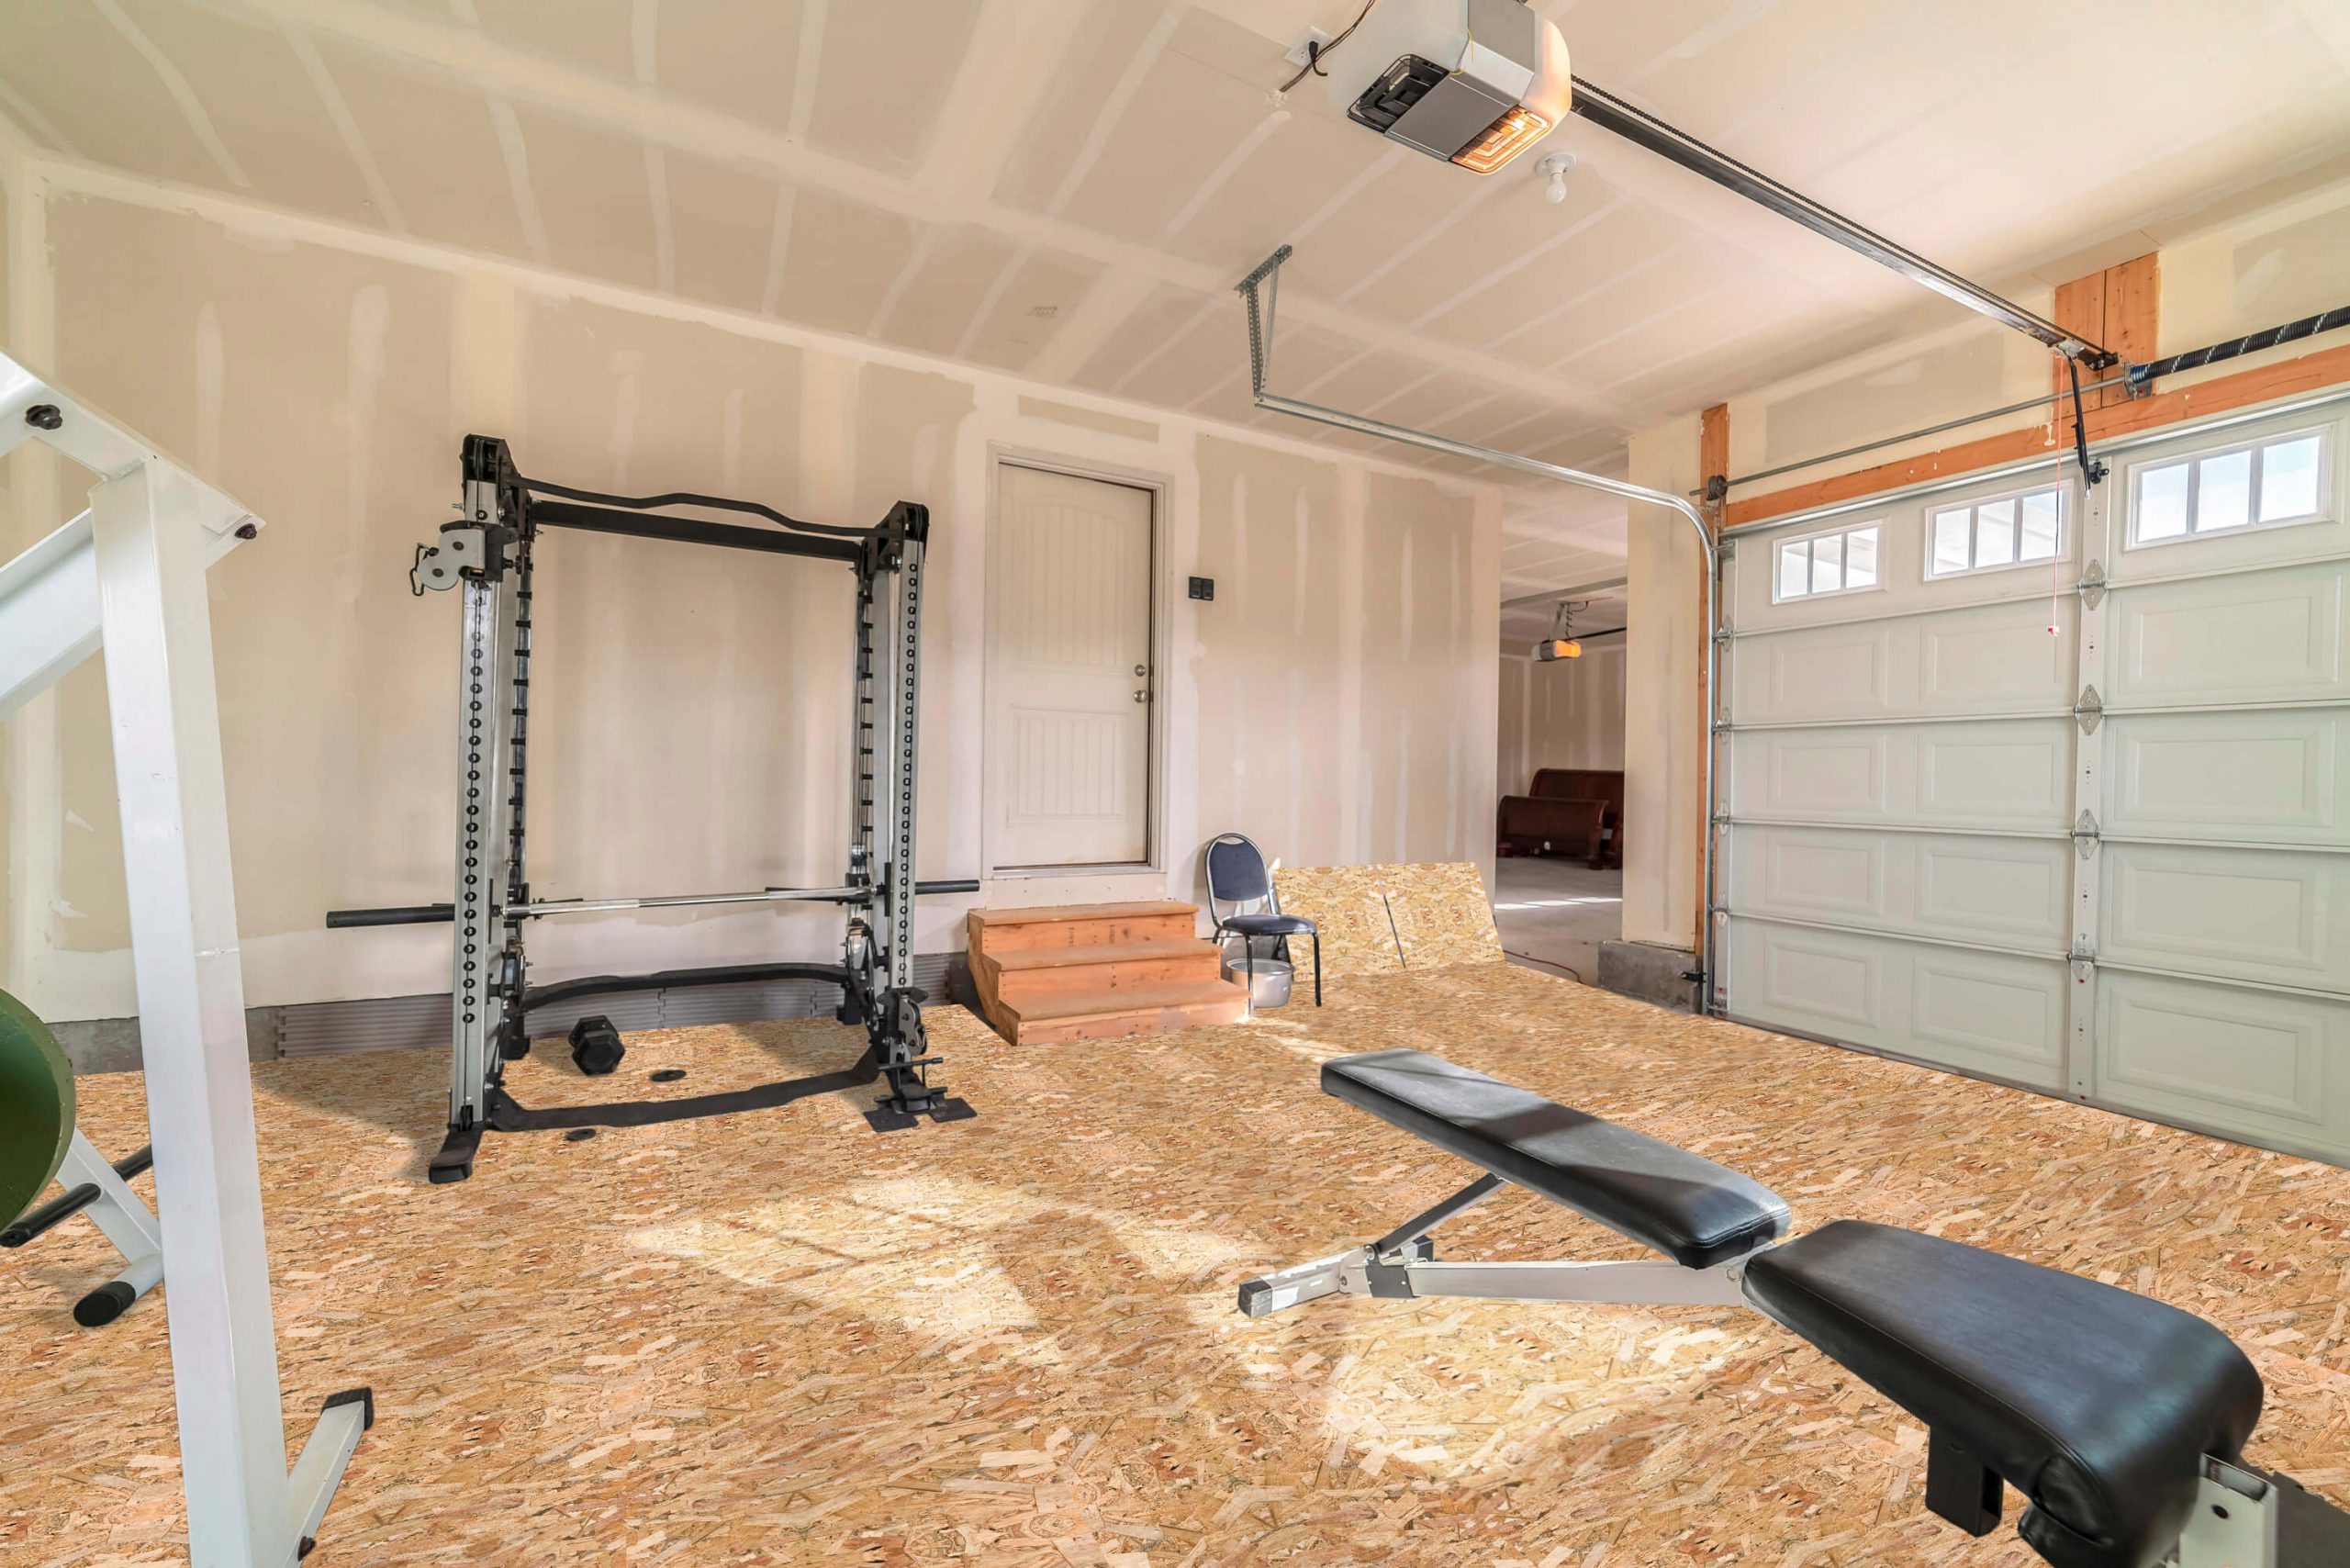 Garage Into Usable Living Space, Is It Easy To Convert A Garage Into Room